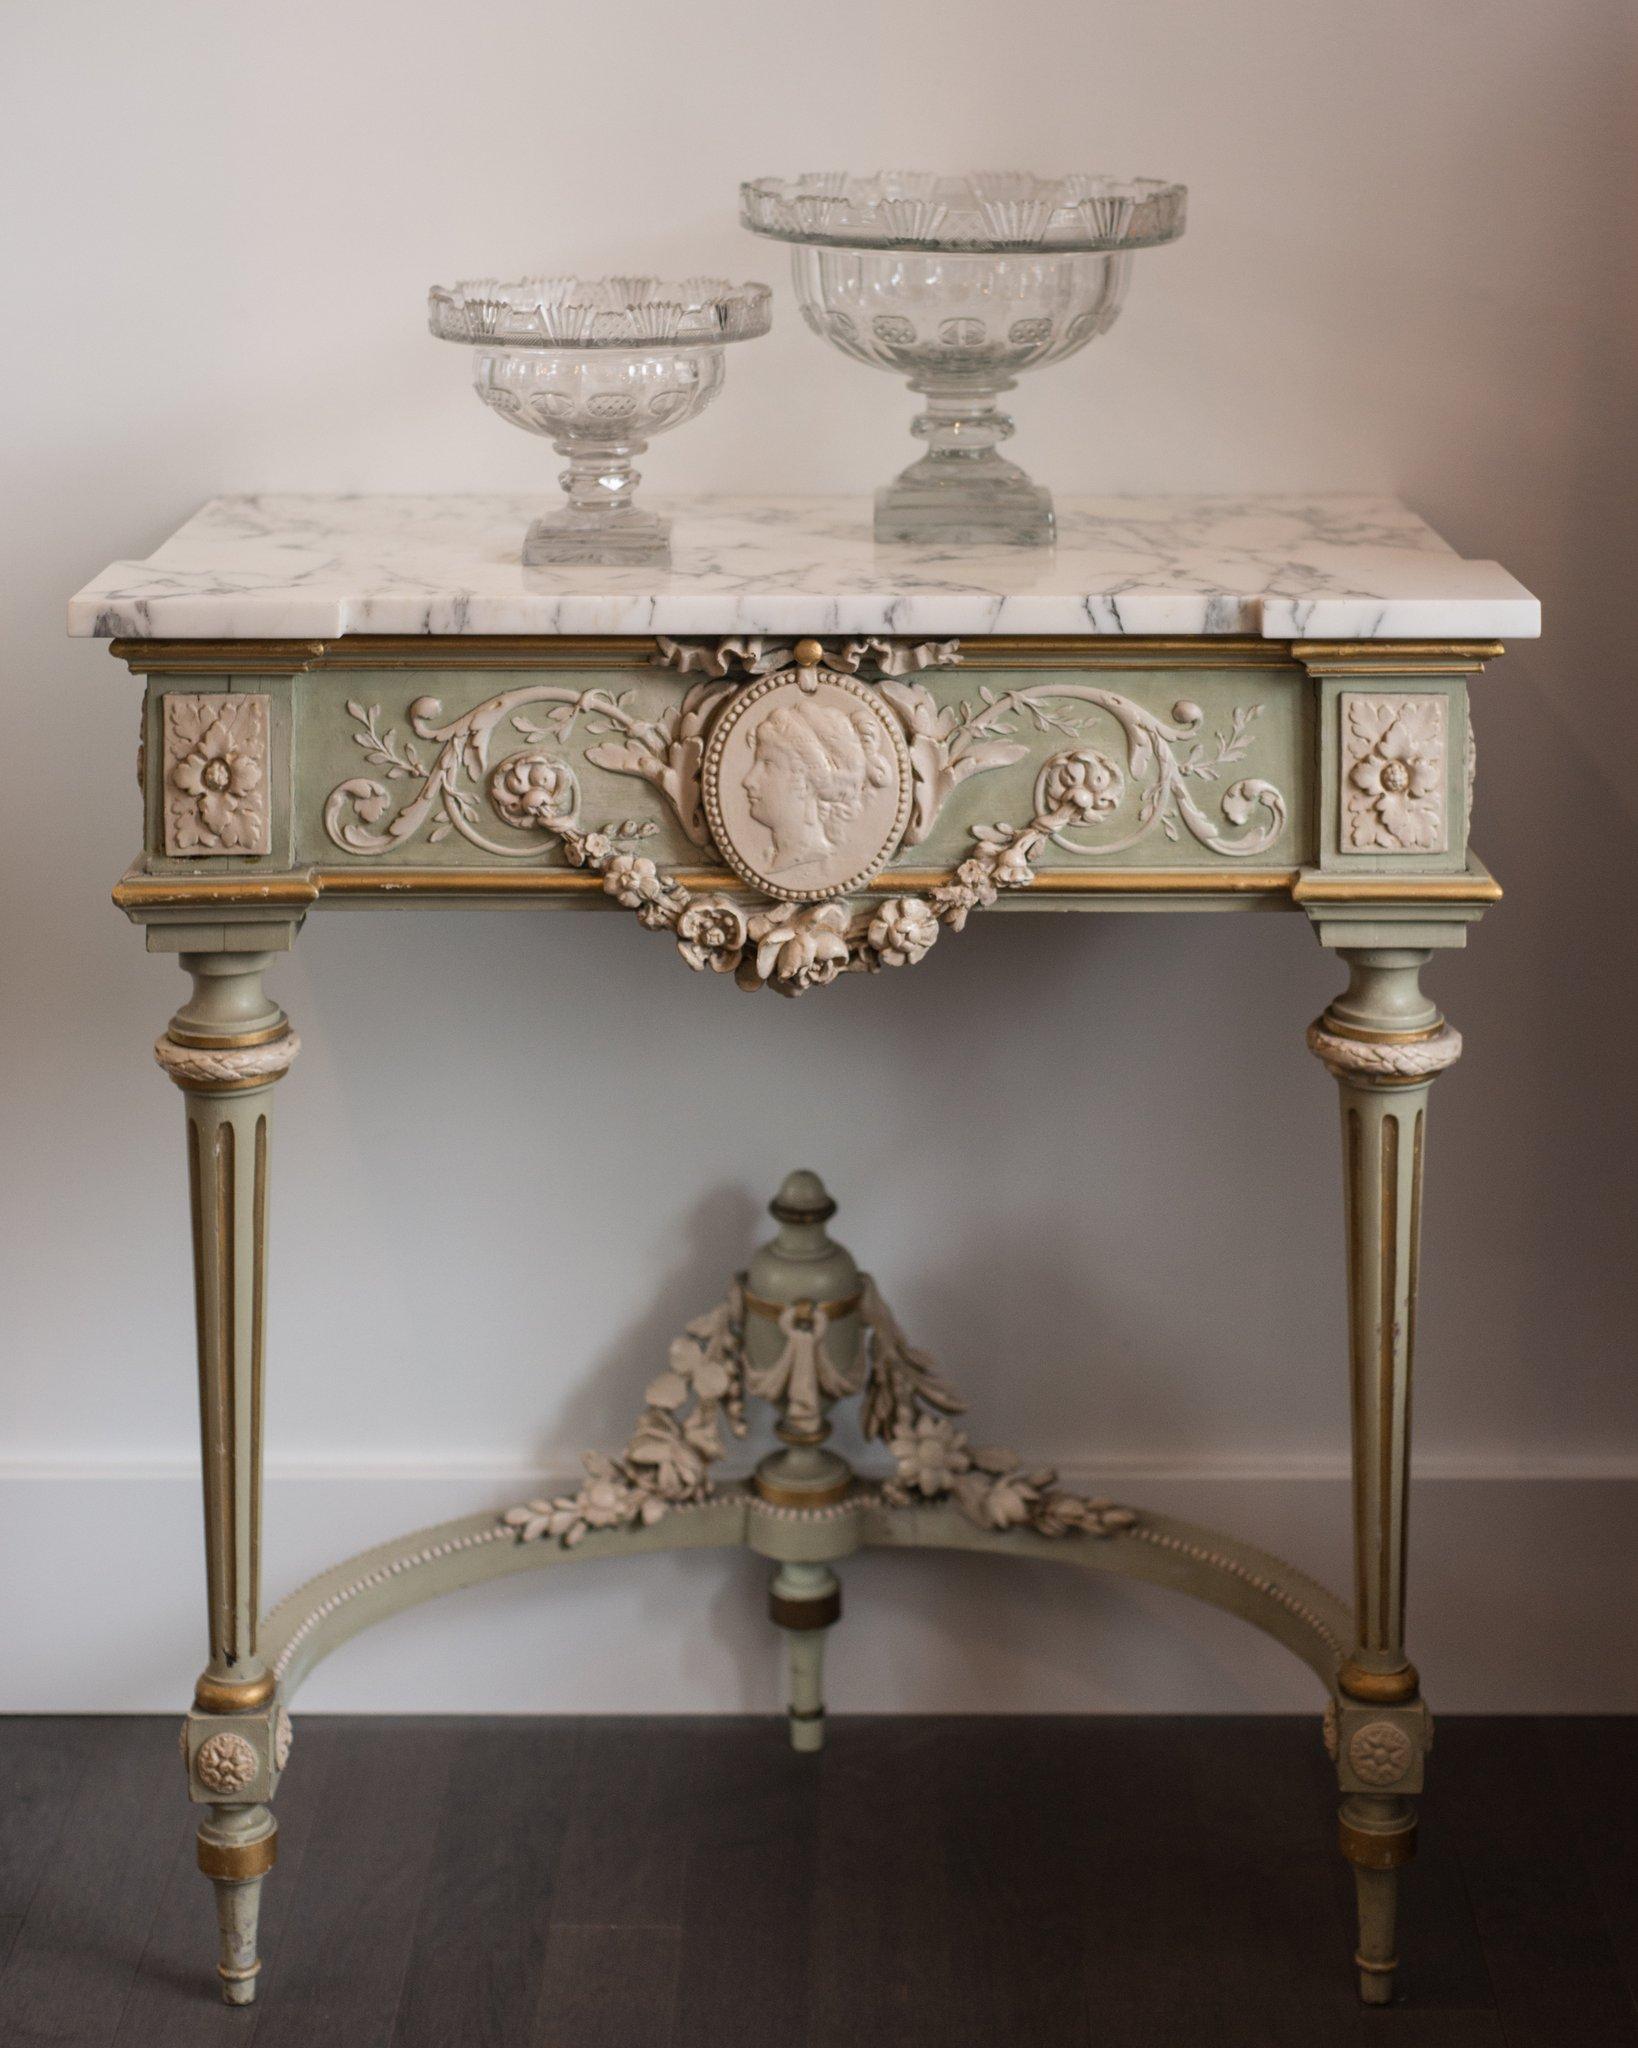 Imagine this stunning antique French console with a carved cameo in your entrance hall. In a small space this console could very easily become a bar. This Napoleon III console has been hand painted in crème and mint green which gives it an unusual